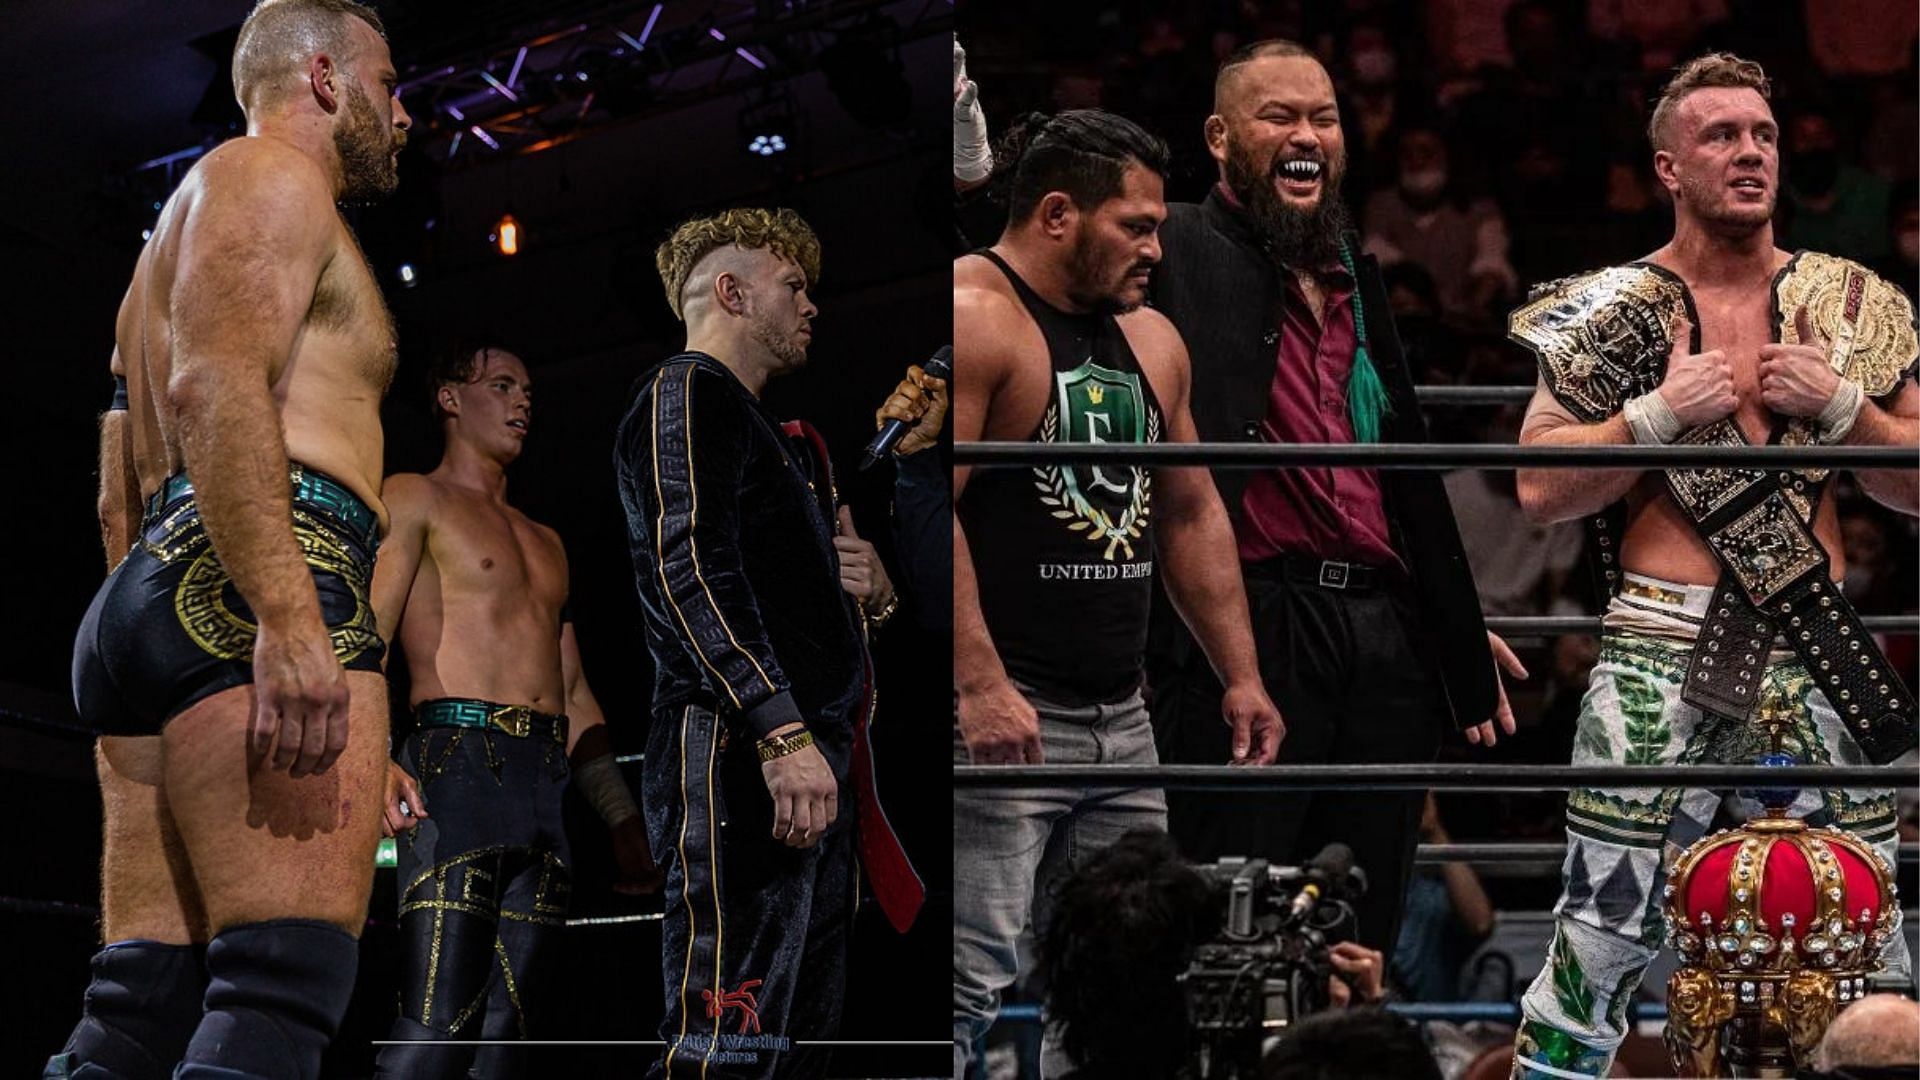 Could Will Ospreay&#039;s United Empire add a new member to their ranks?